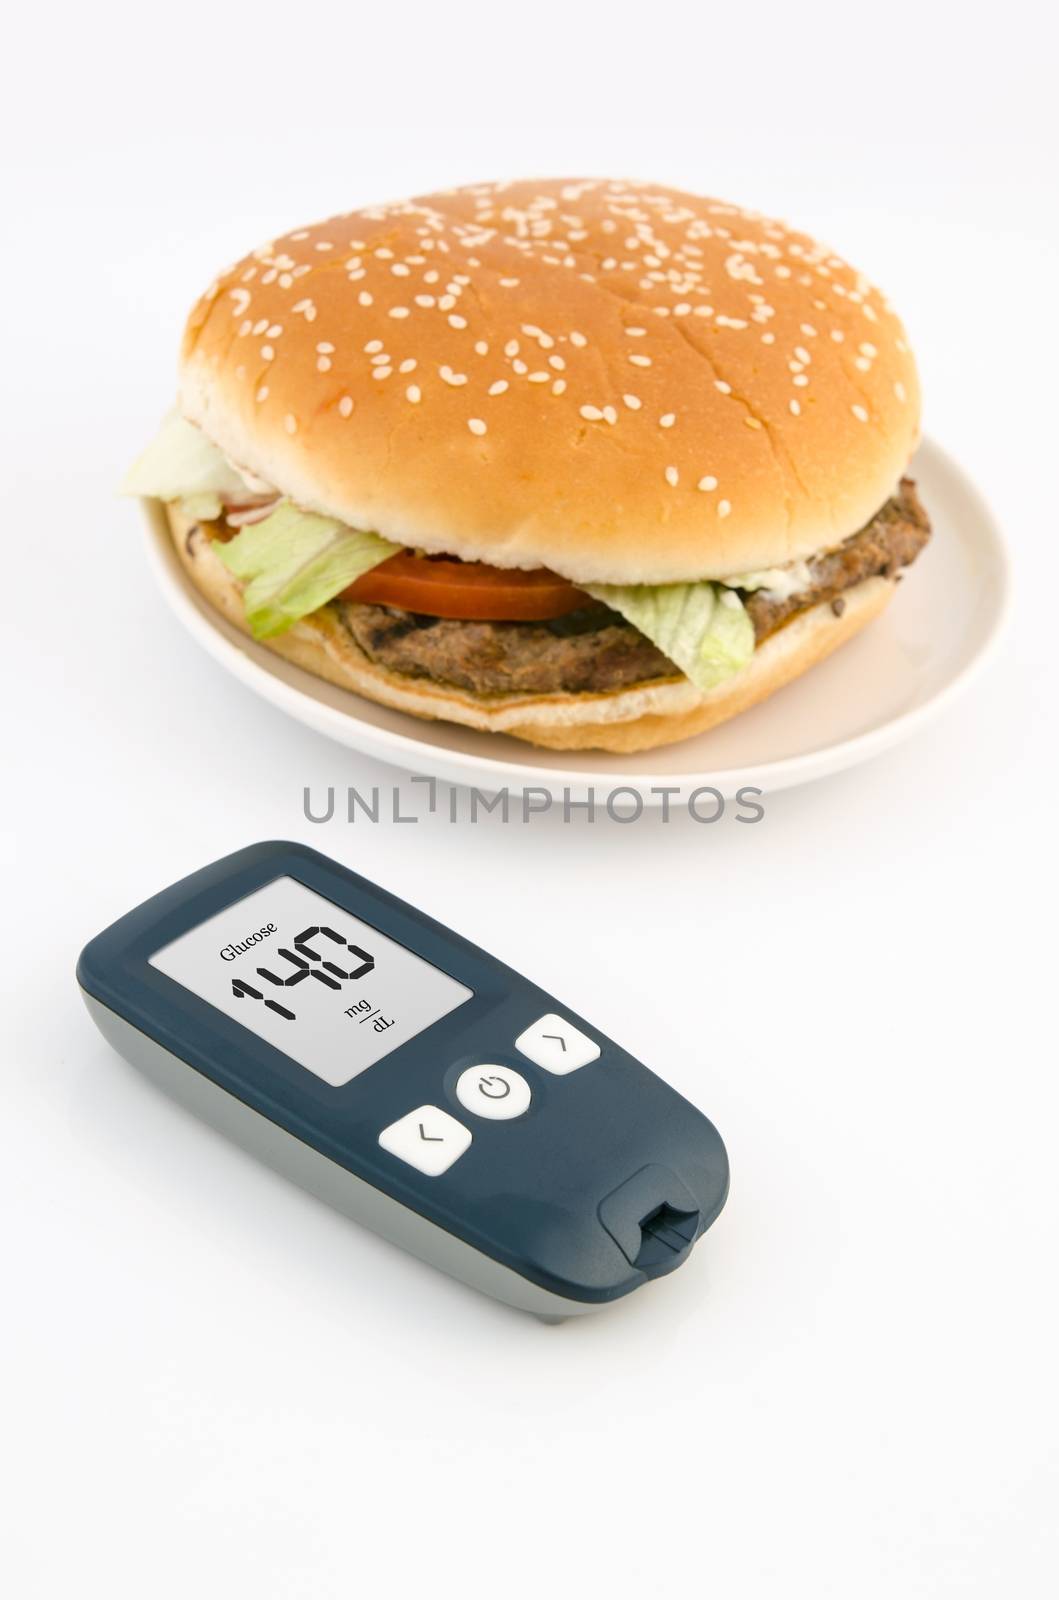 Glucometer and hamburger. Healthy lifestyle